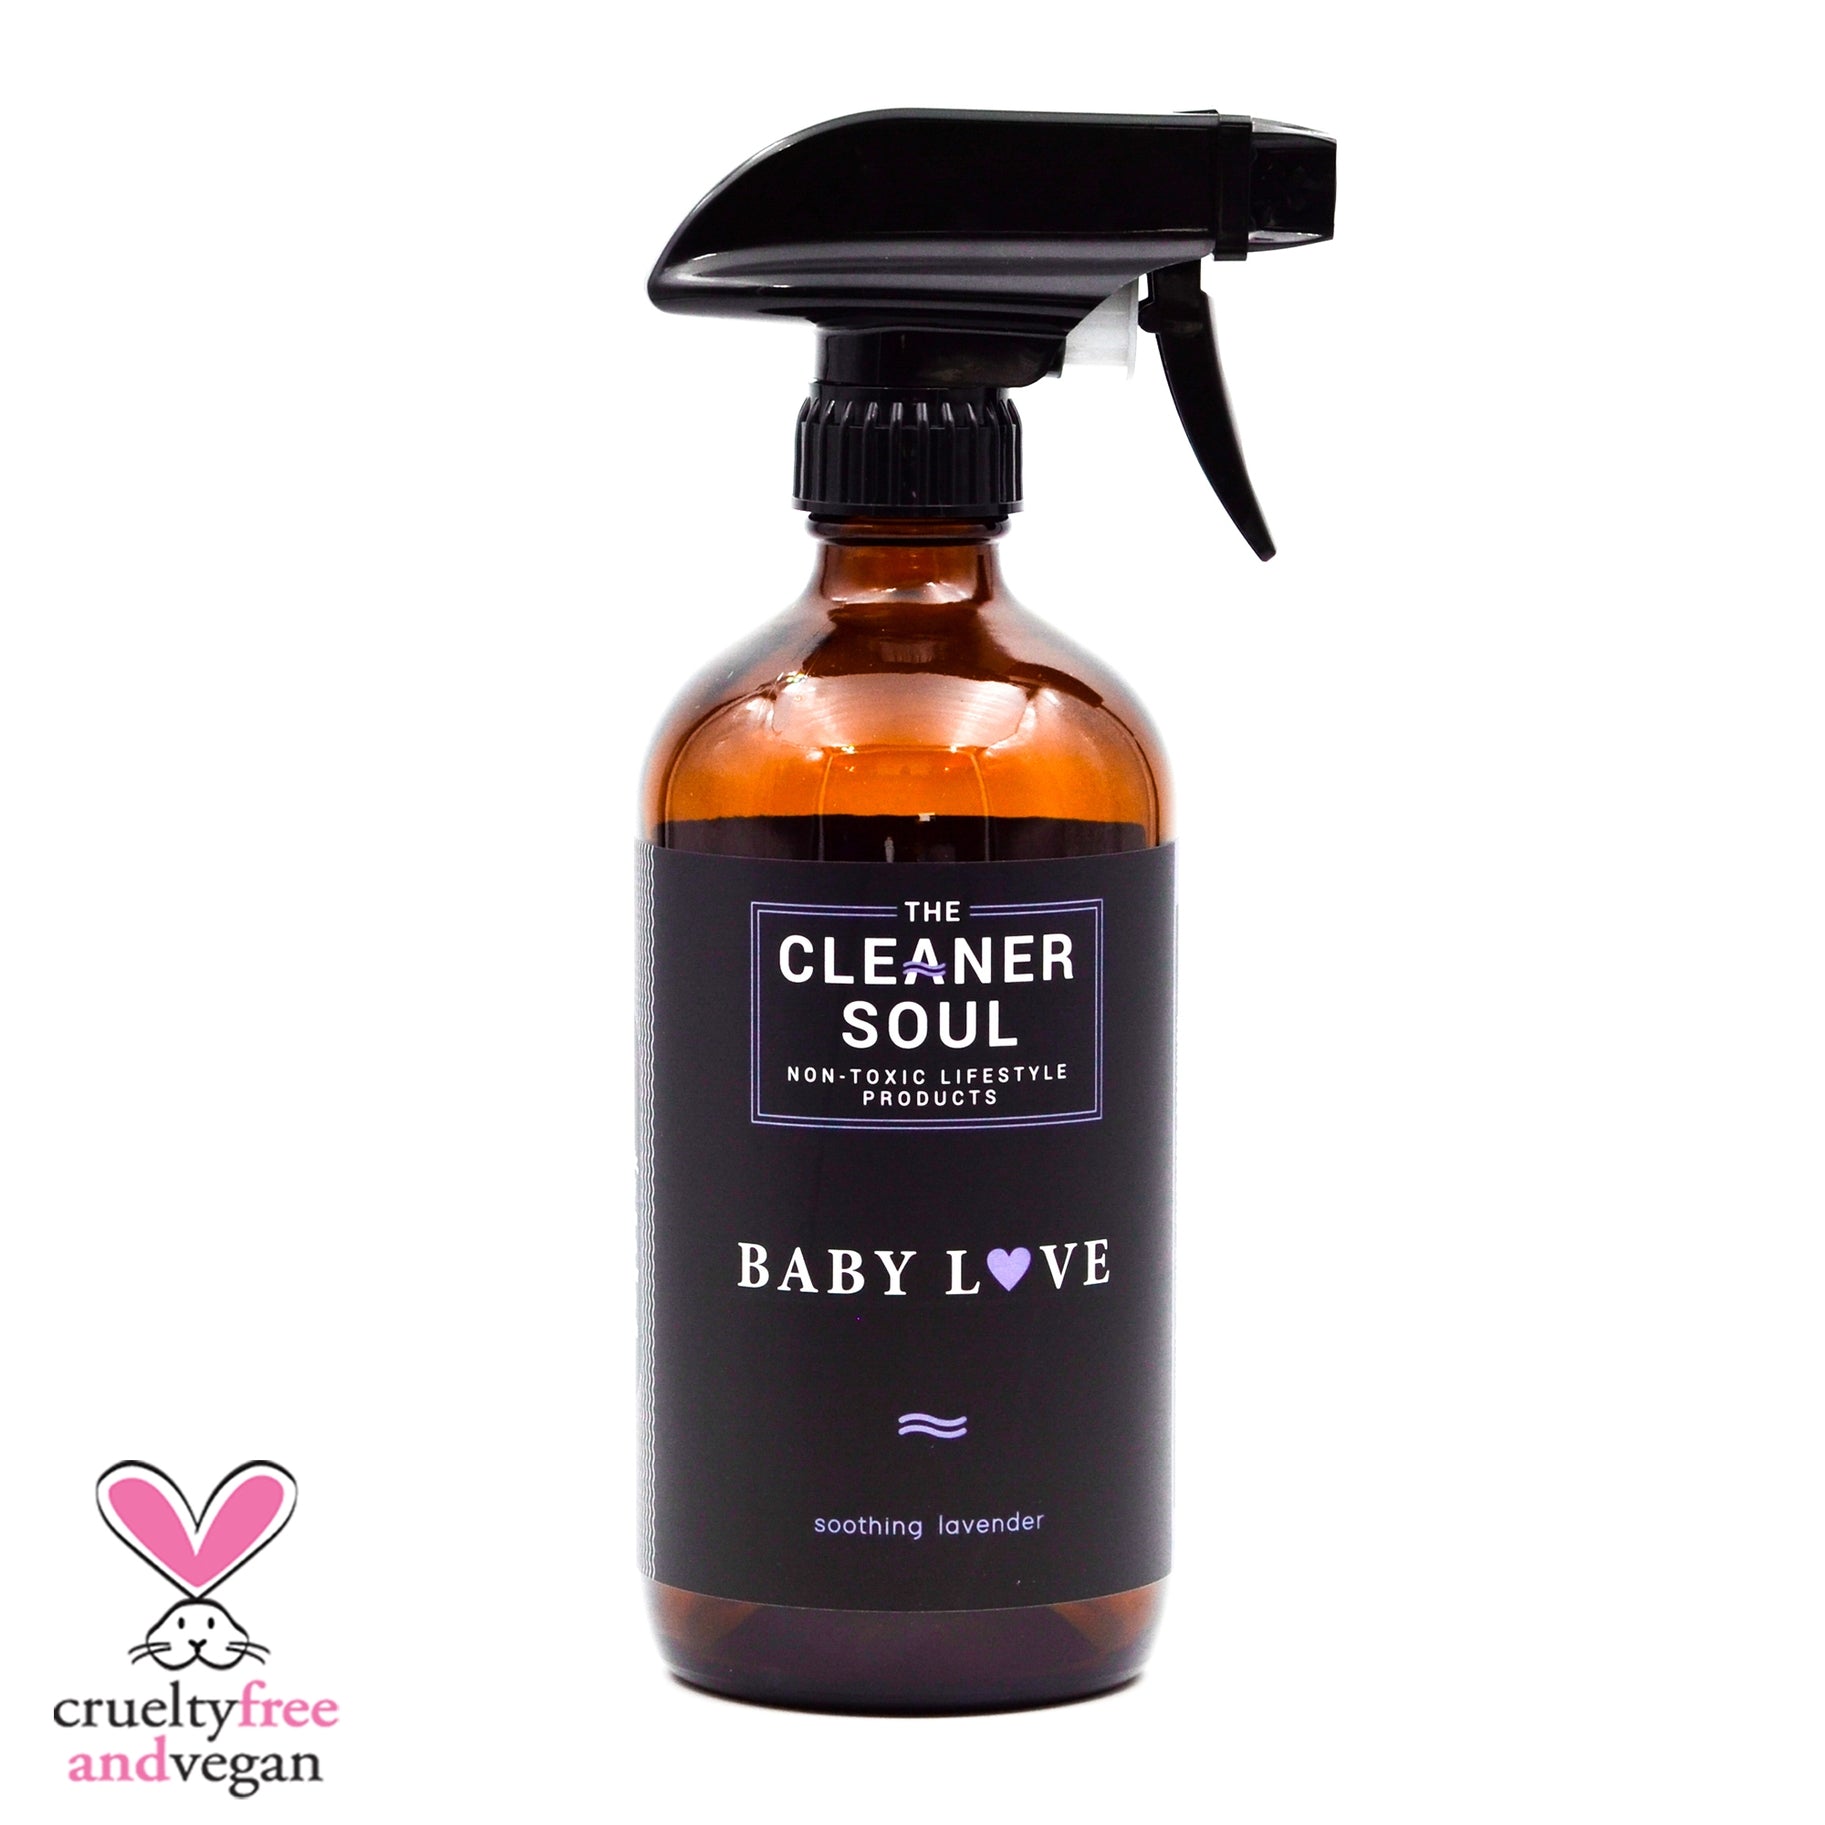 The Cleaner Soul Multi-Purpose Cleaner, Amber Glass Spray Bottle Baby Love